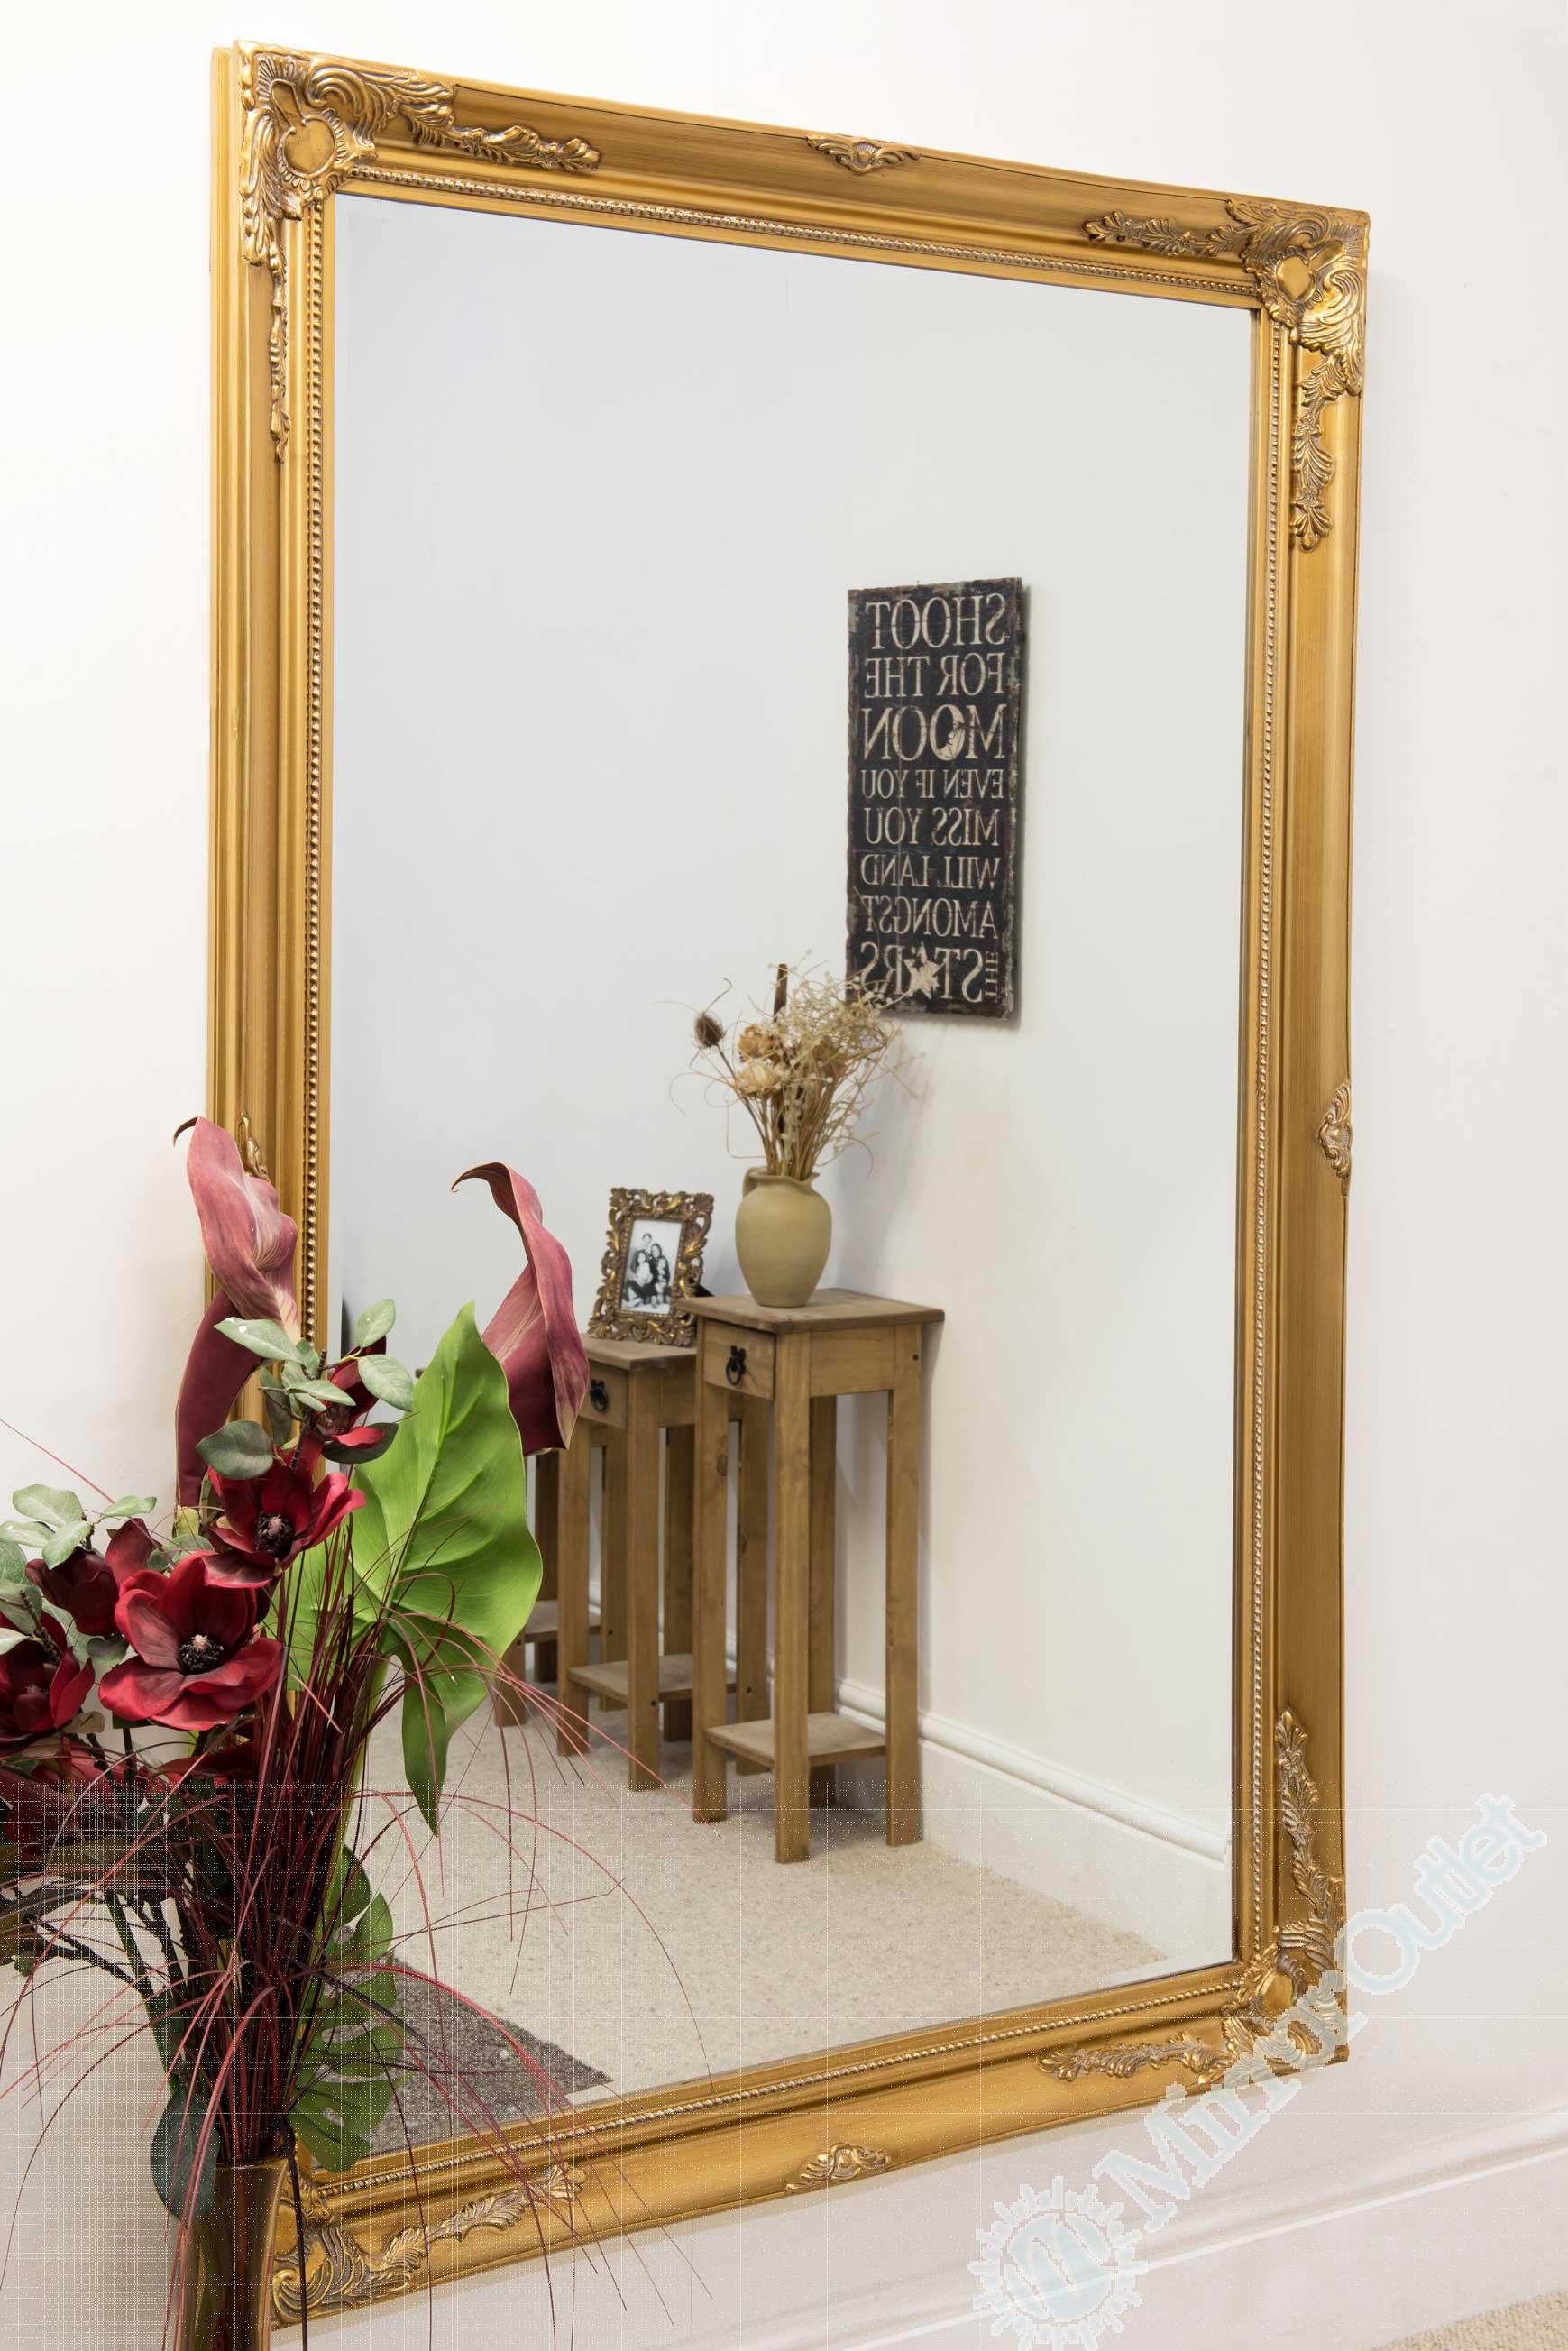 EXTRA LARGE ORNATE Styled Gold Rectangle Wall Mounted Wood Mirror 170cm ...